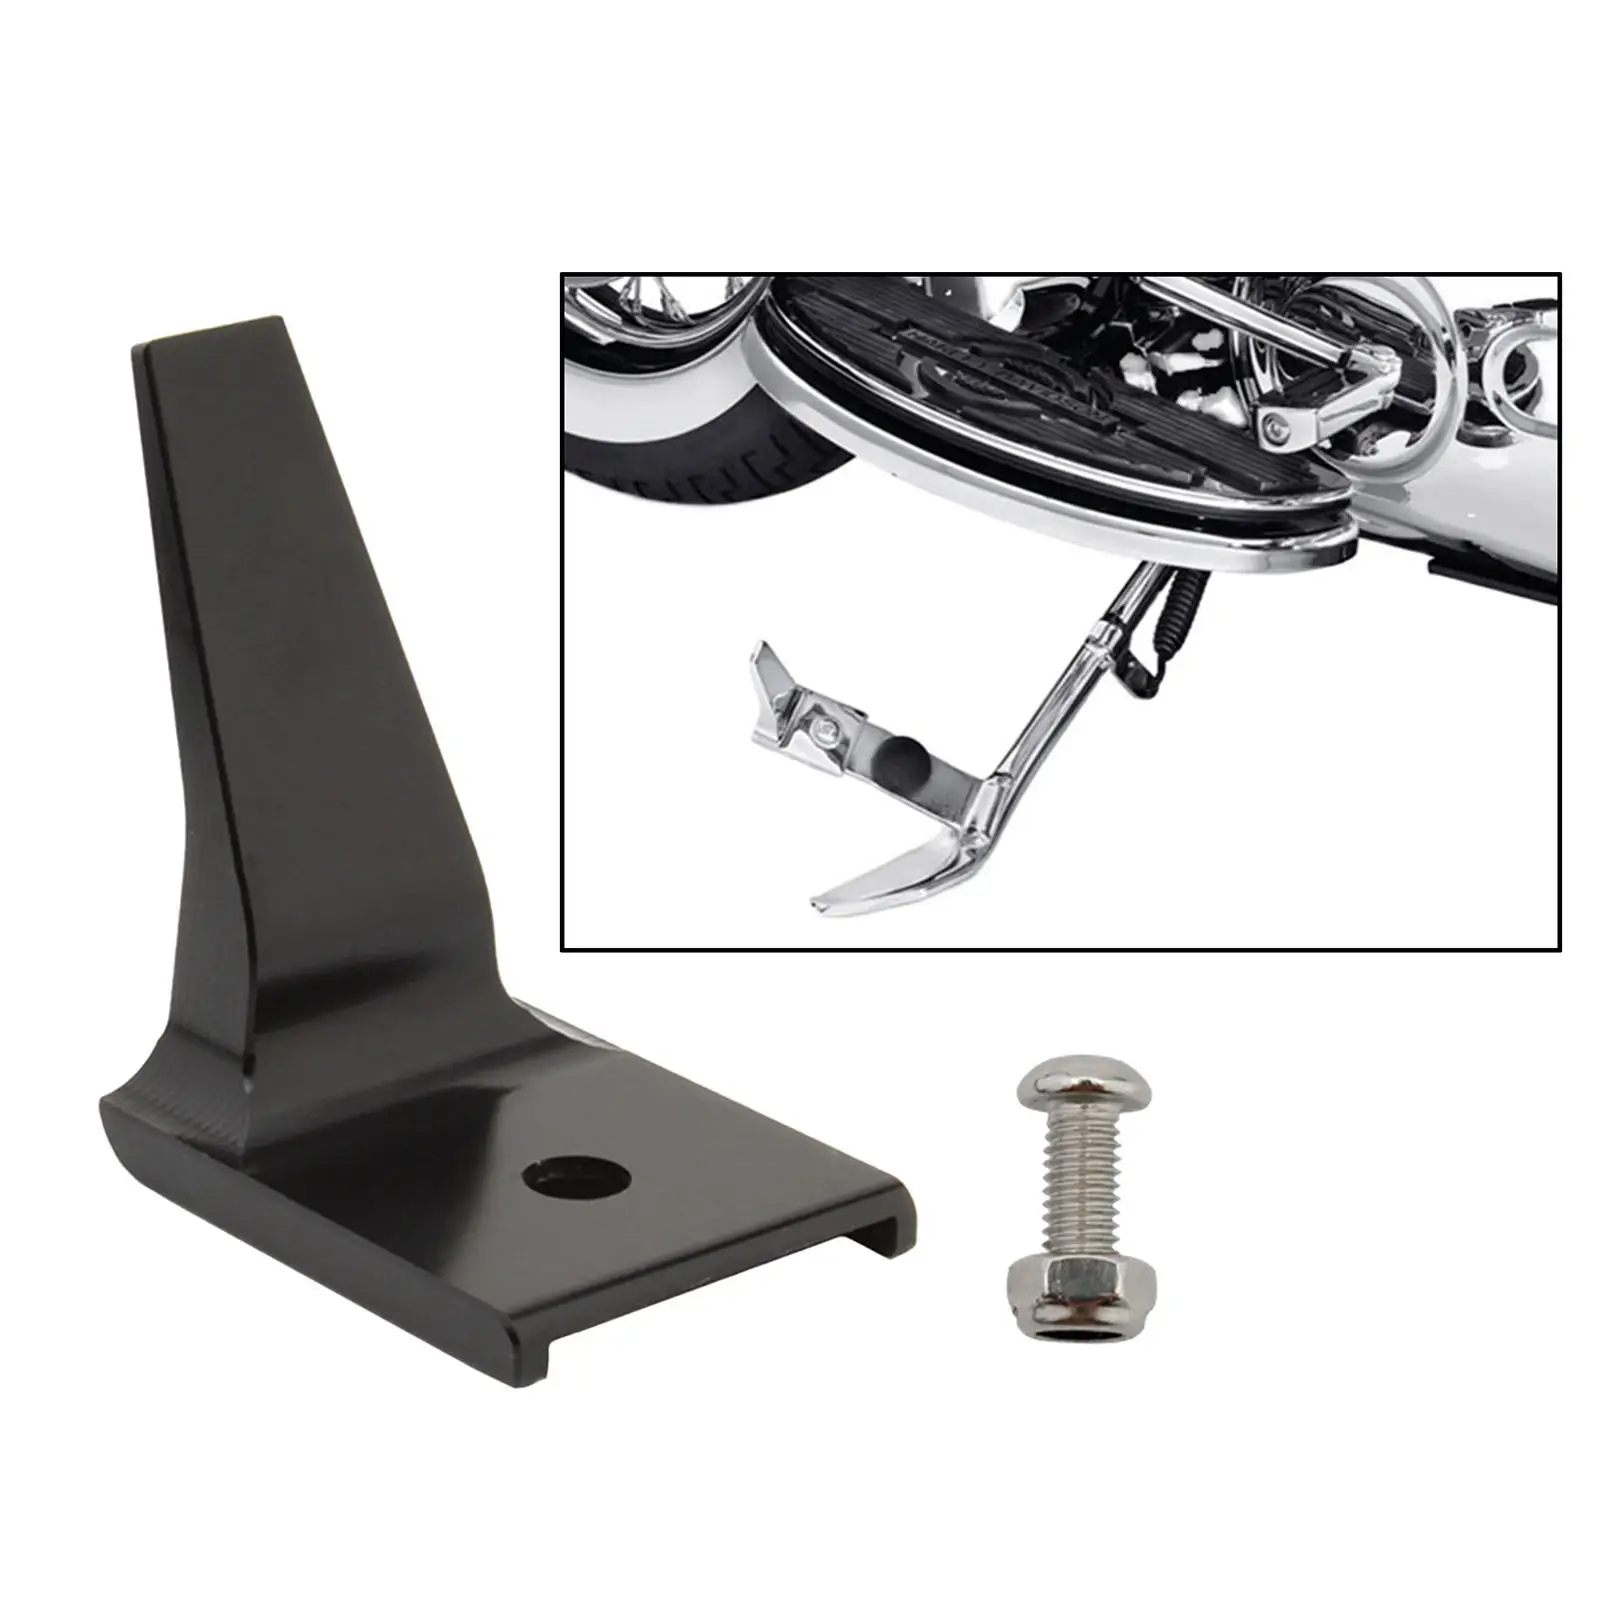 Kickstand Support Extension Kit for Harley  Heritage Classic EFI TCI 2007 -2017  SlimS S 2016- 2017